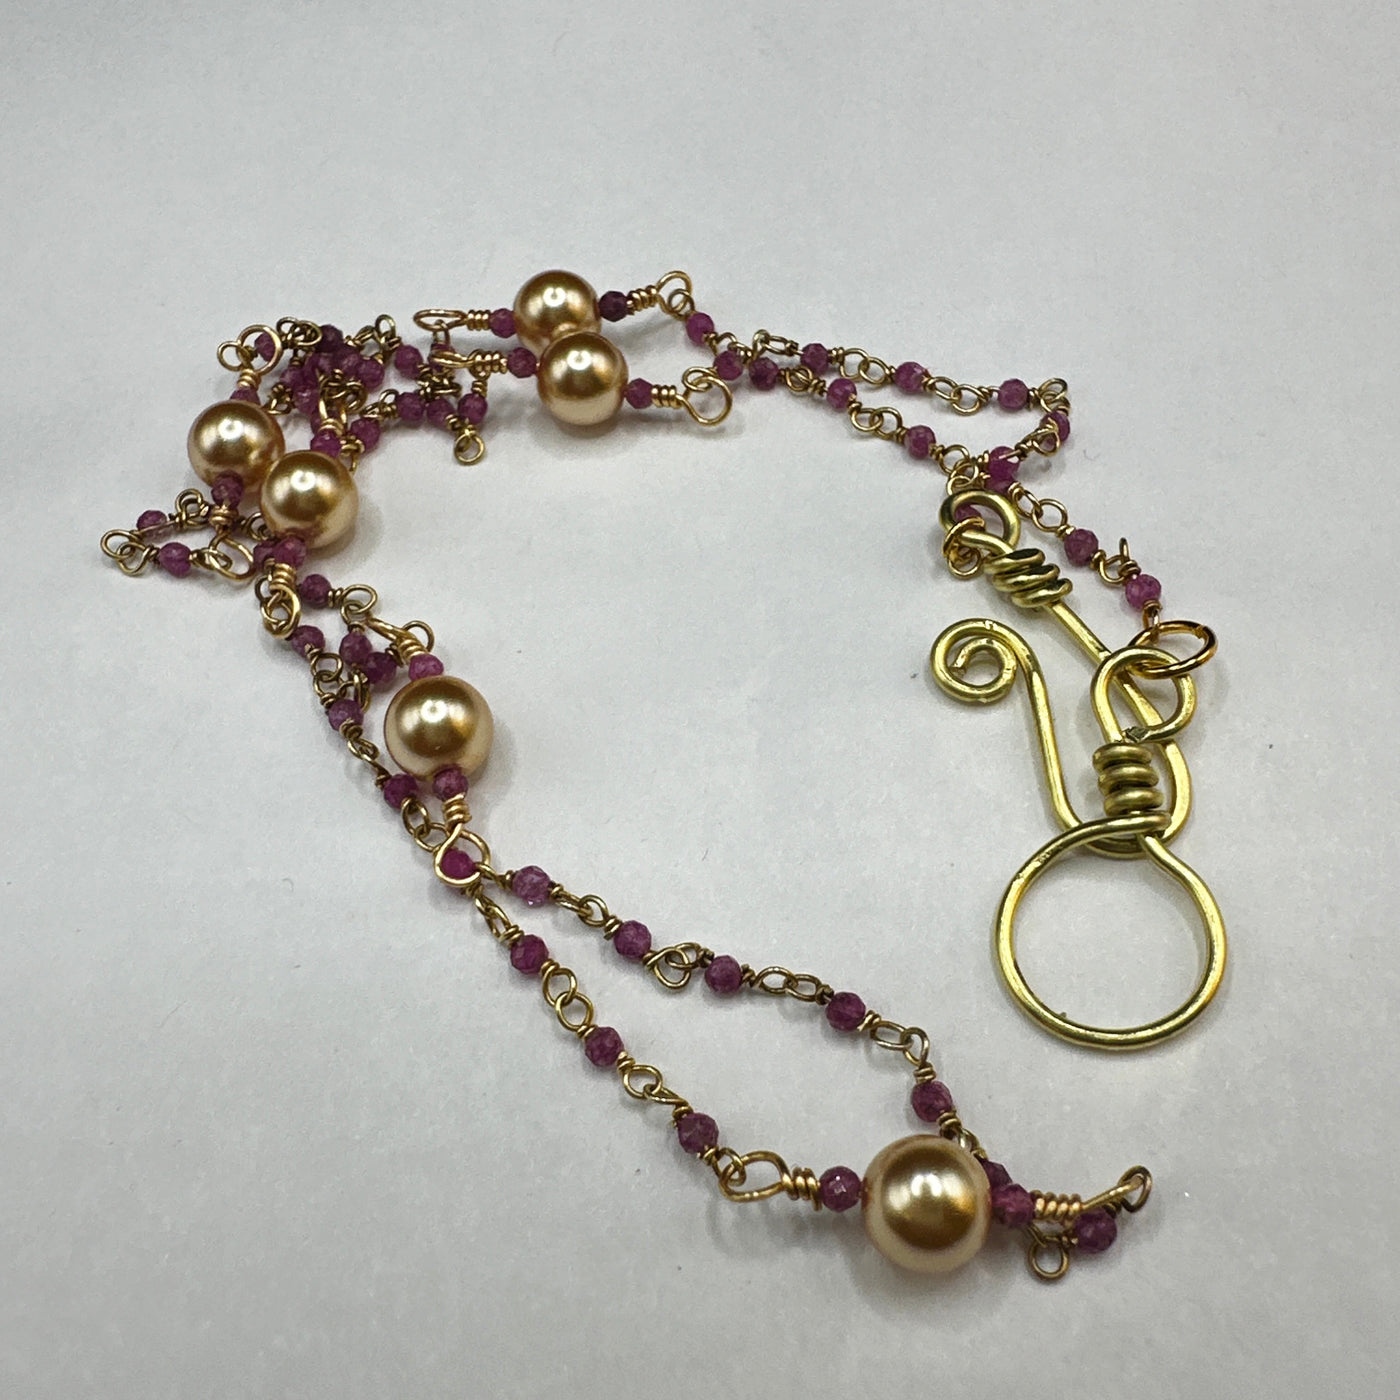 Necklace silver 925 with violet beads and golden pearls